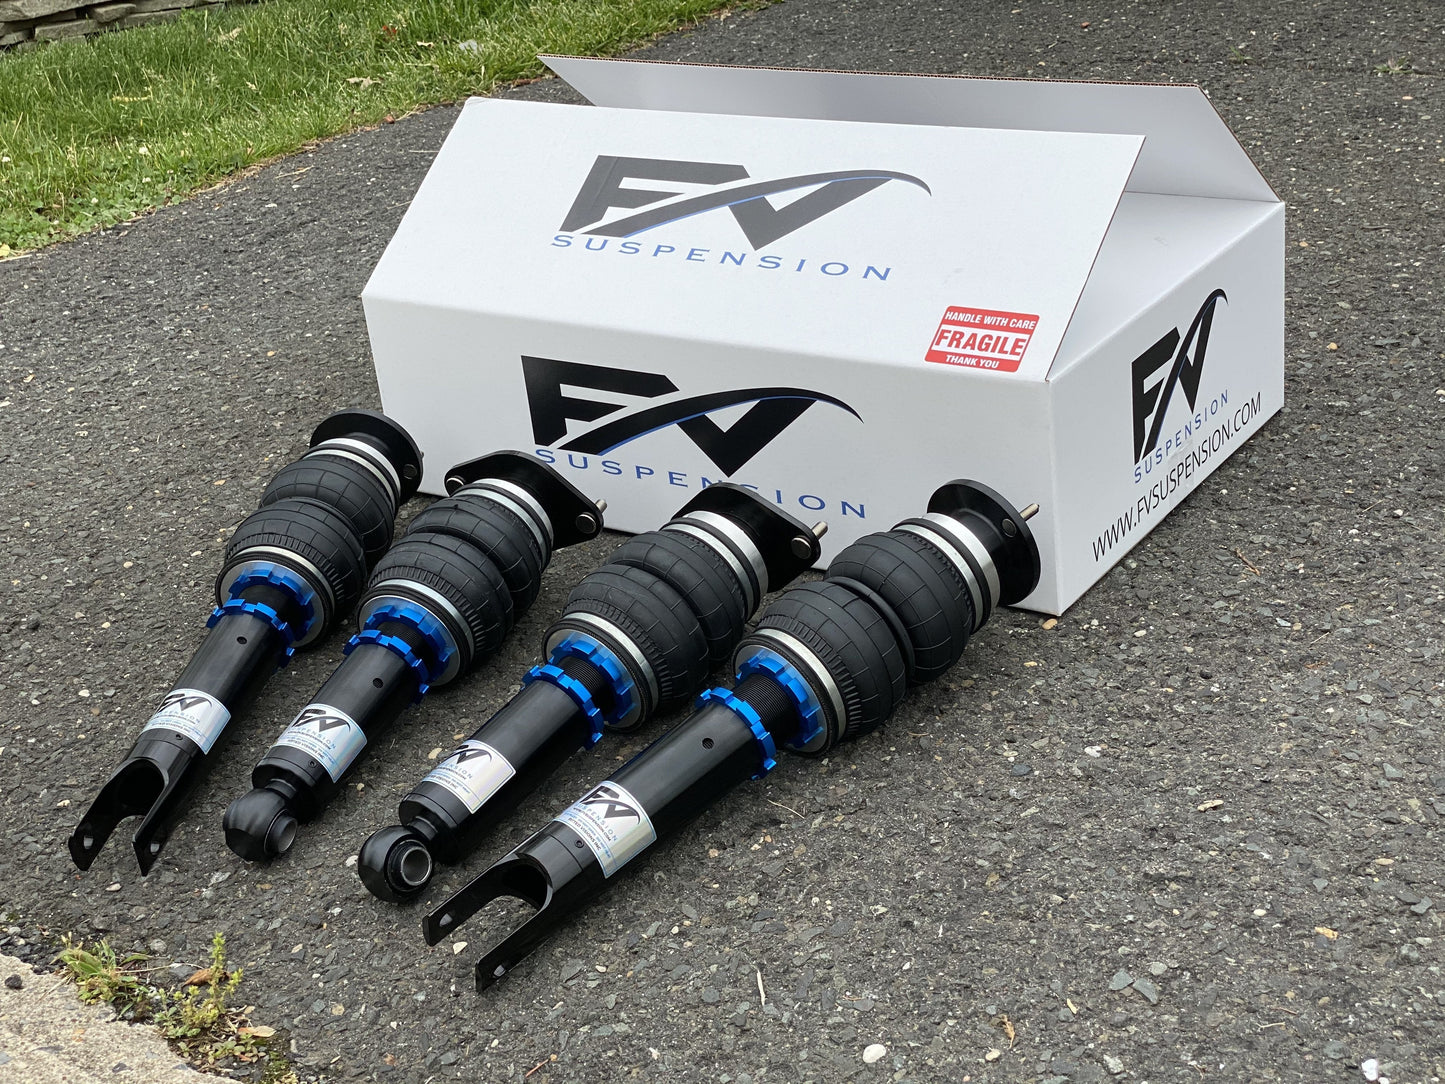 FV Suspension 3H Tier 3 Complete Air Ride kit for 00-05 Mitsubishi Eclipse 3G - Full Kit